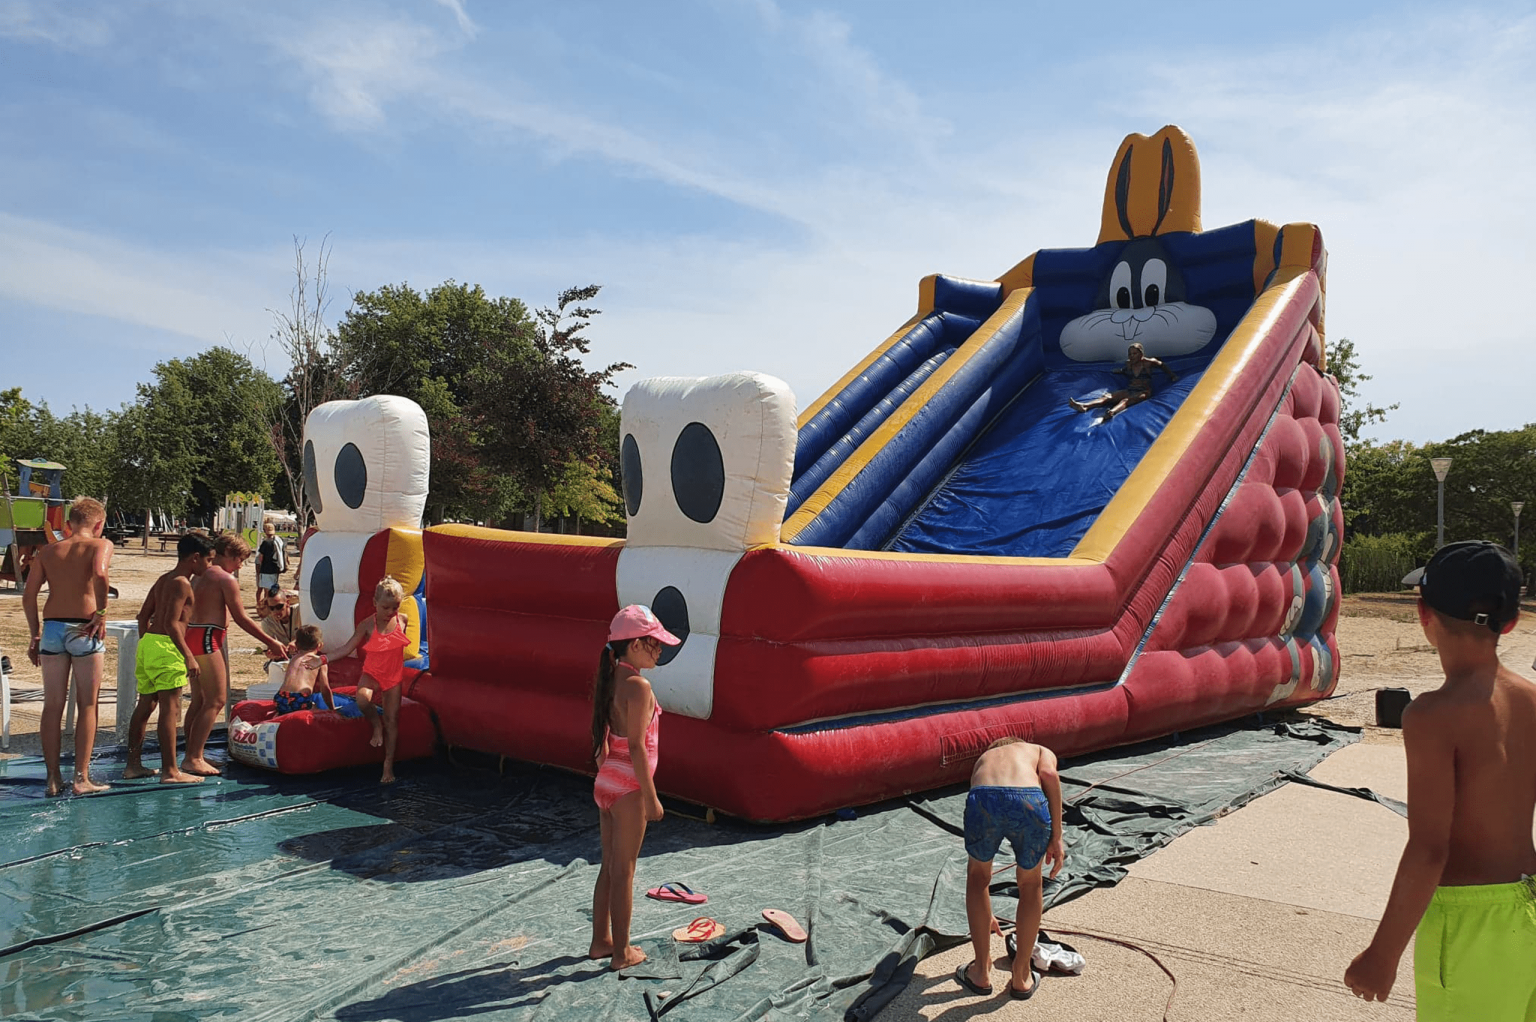 Inflatable structure for children